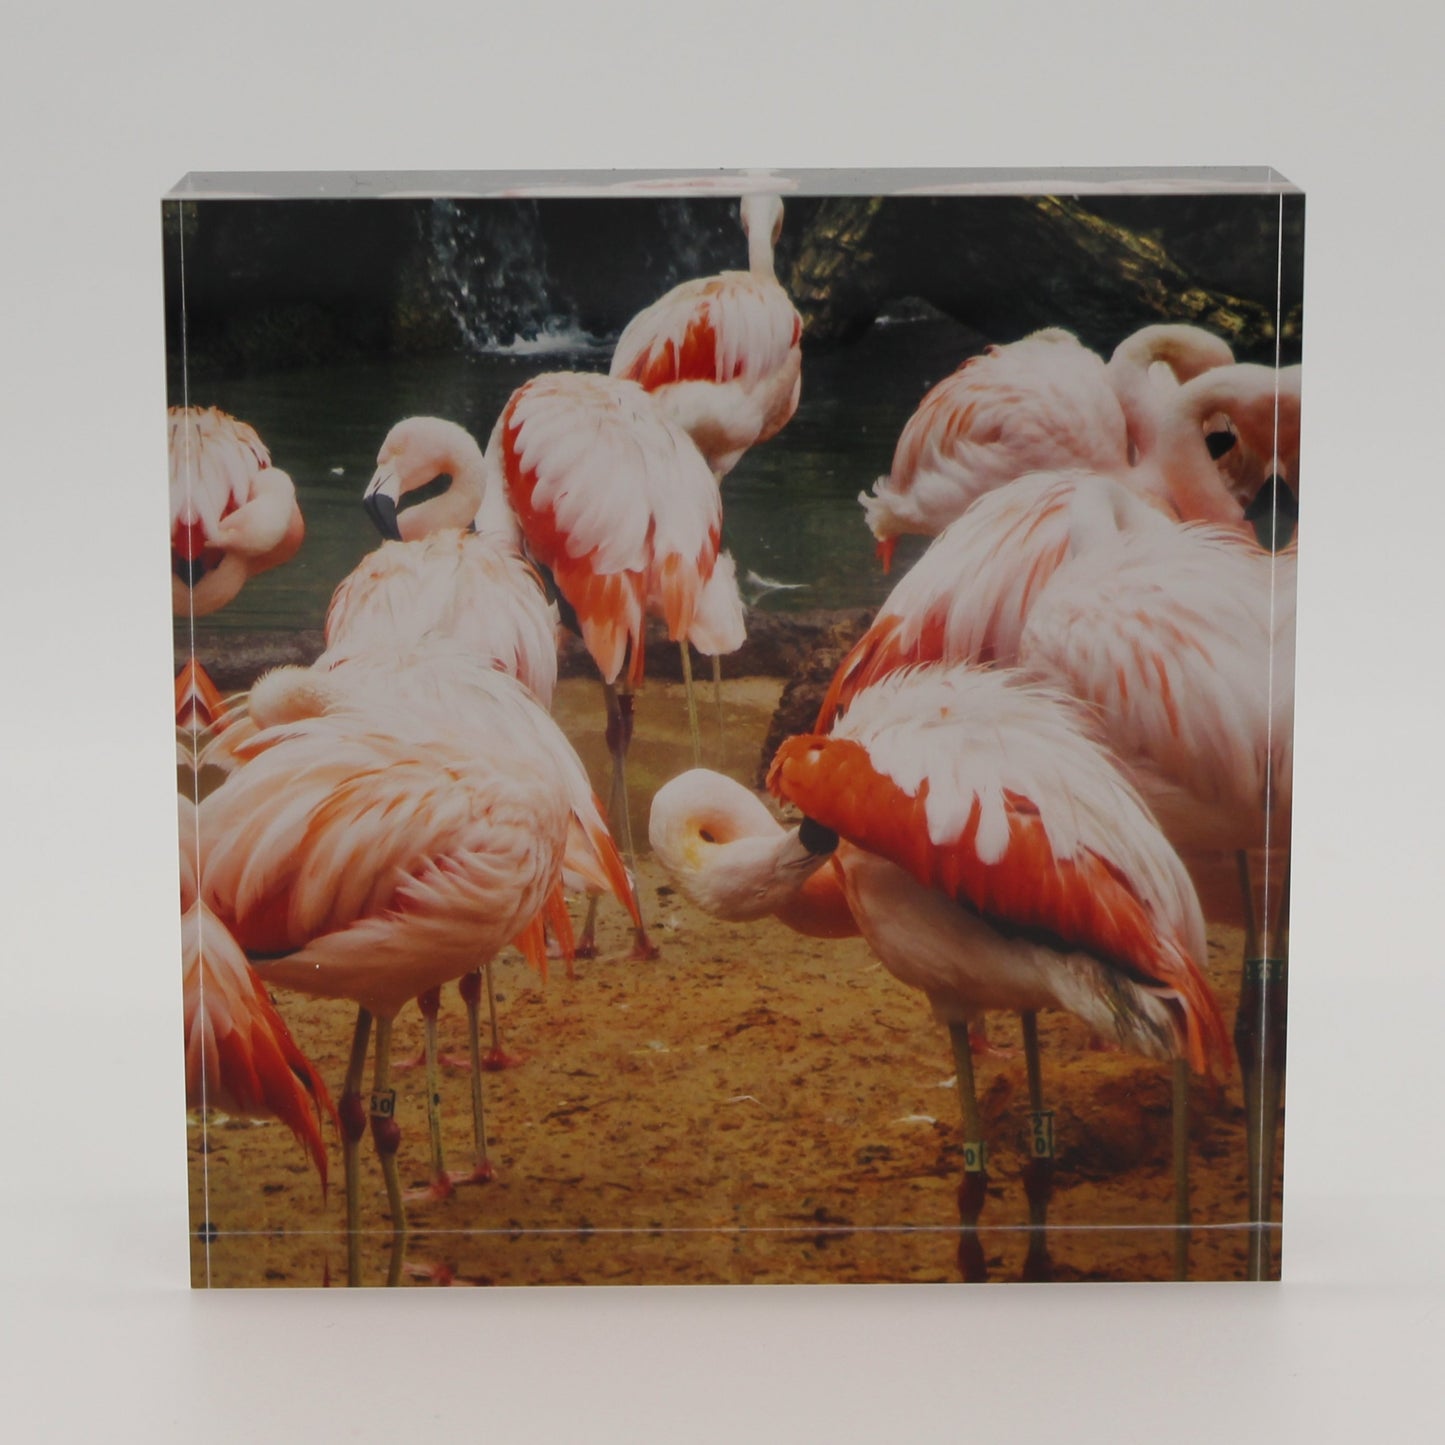 Acrylic block picture of pink flamingoes on a sandy beach